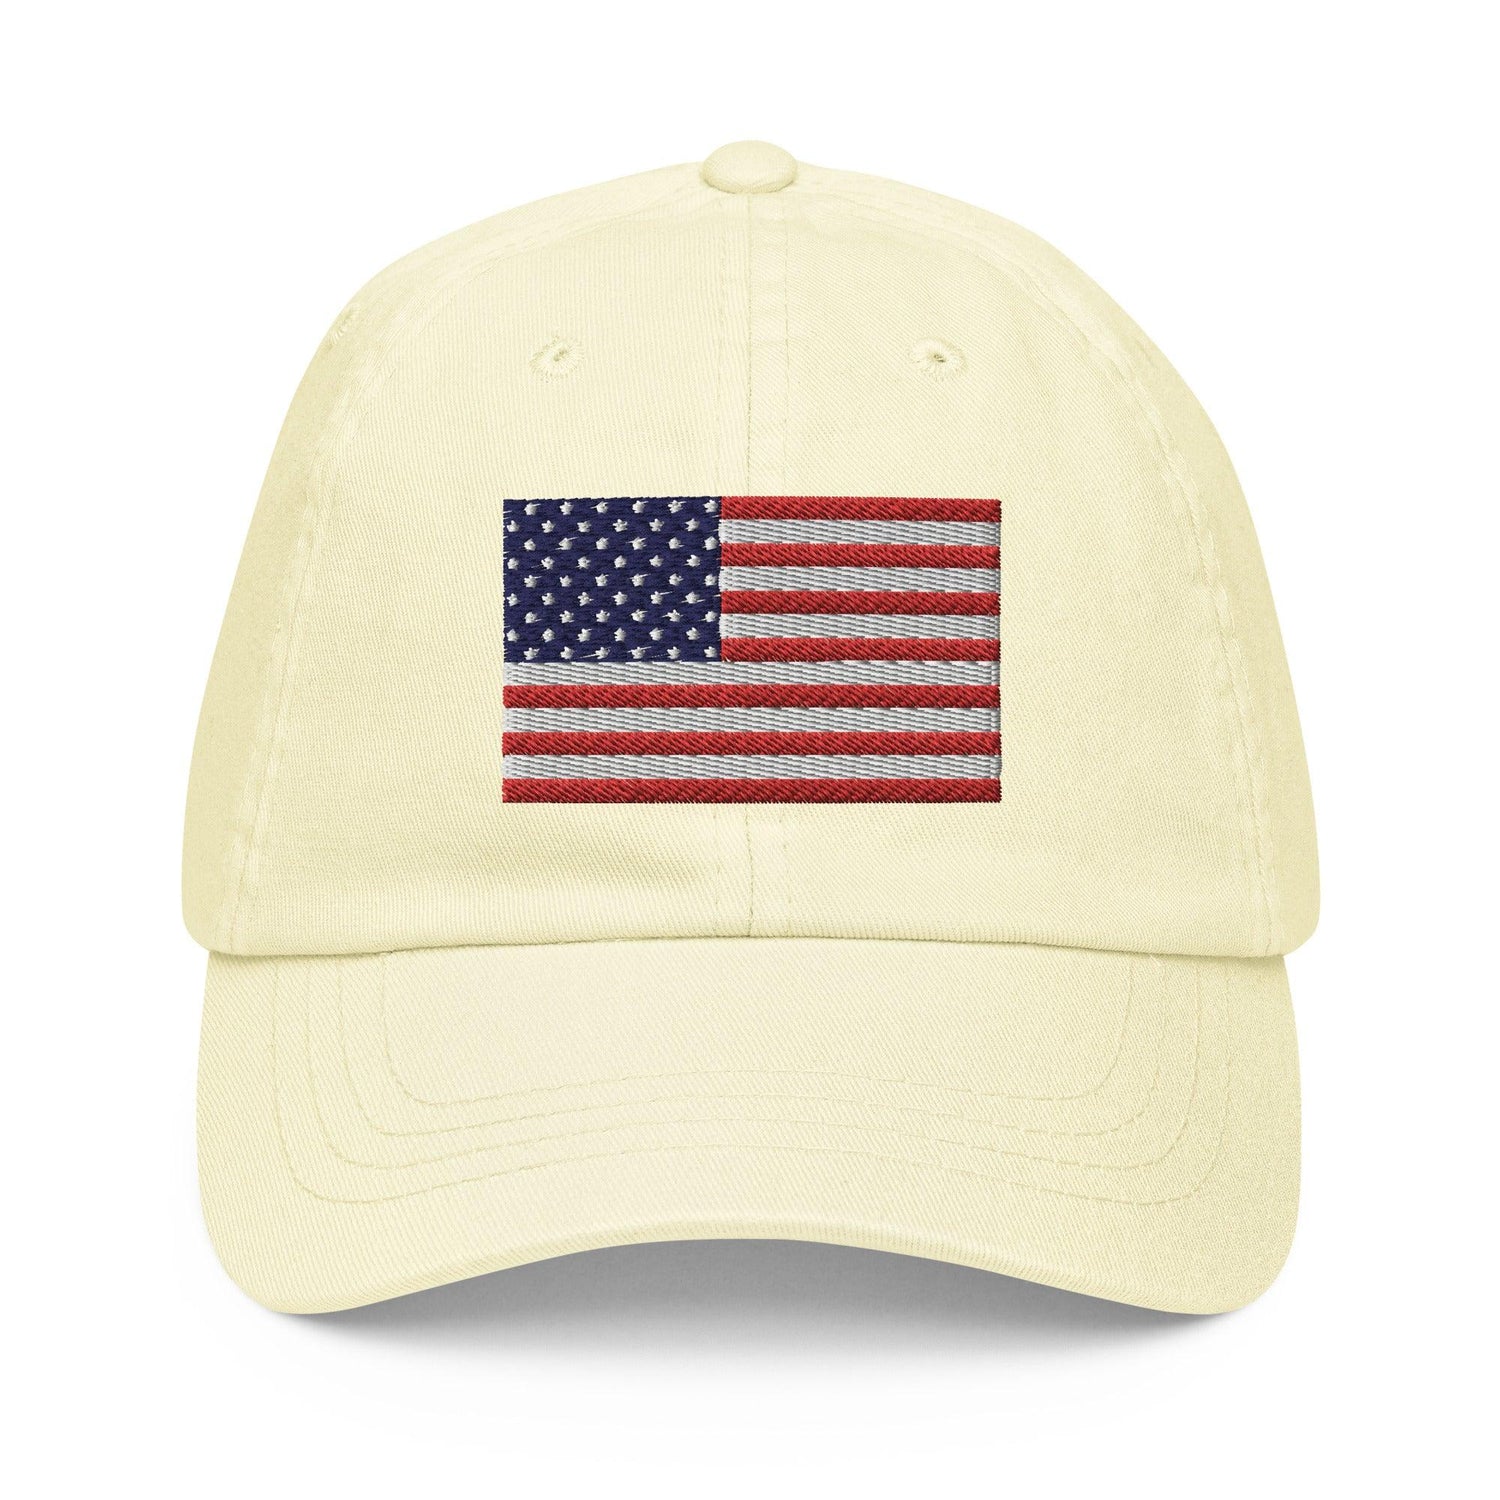 Embroidery American Flag Pastel baseball hat